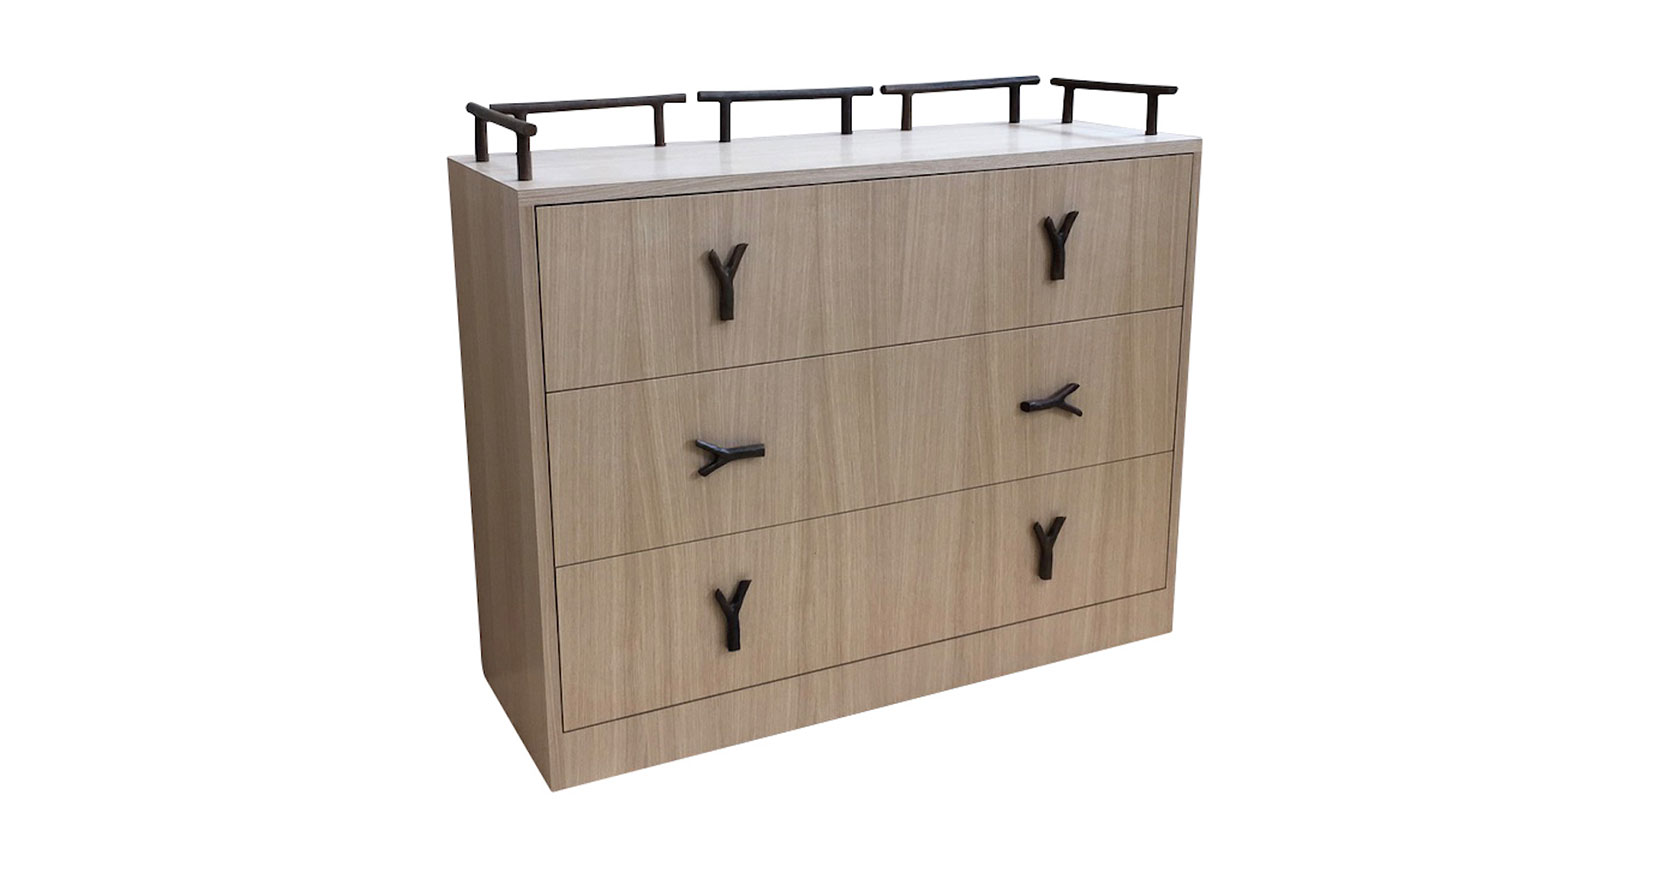 Garouste Bonetti, rectangular minimalist chest of drawers in light wood, 3 drawers each with two black bronze handles in the shape of forks, top surrounded by 5 black bronze rails